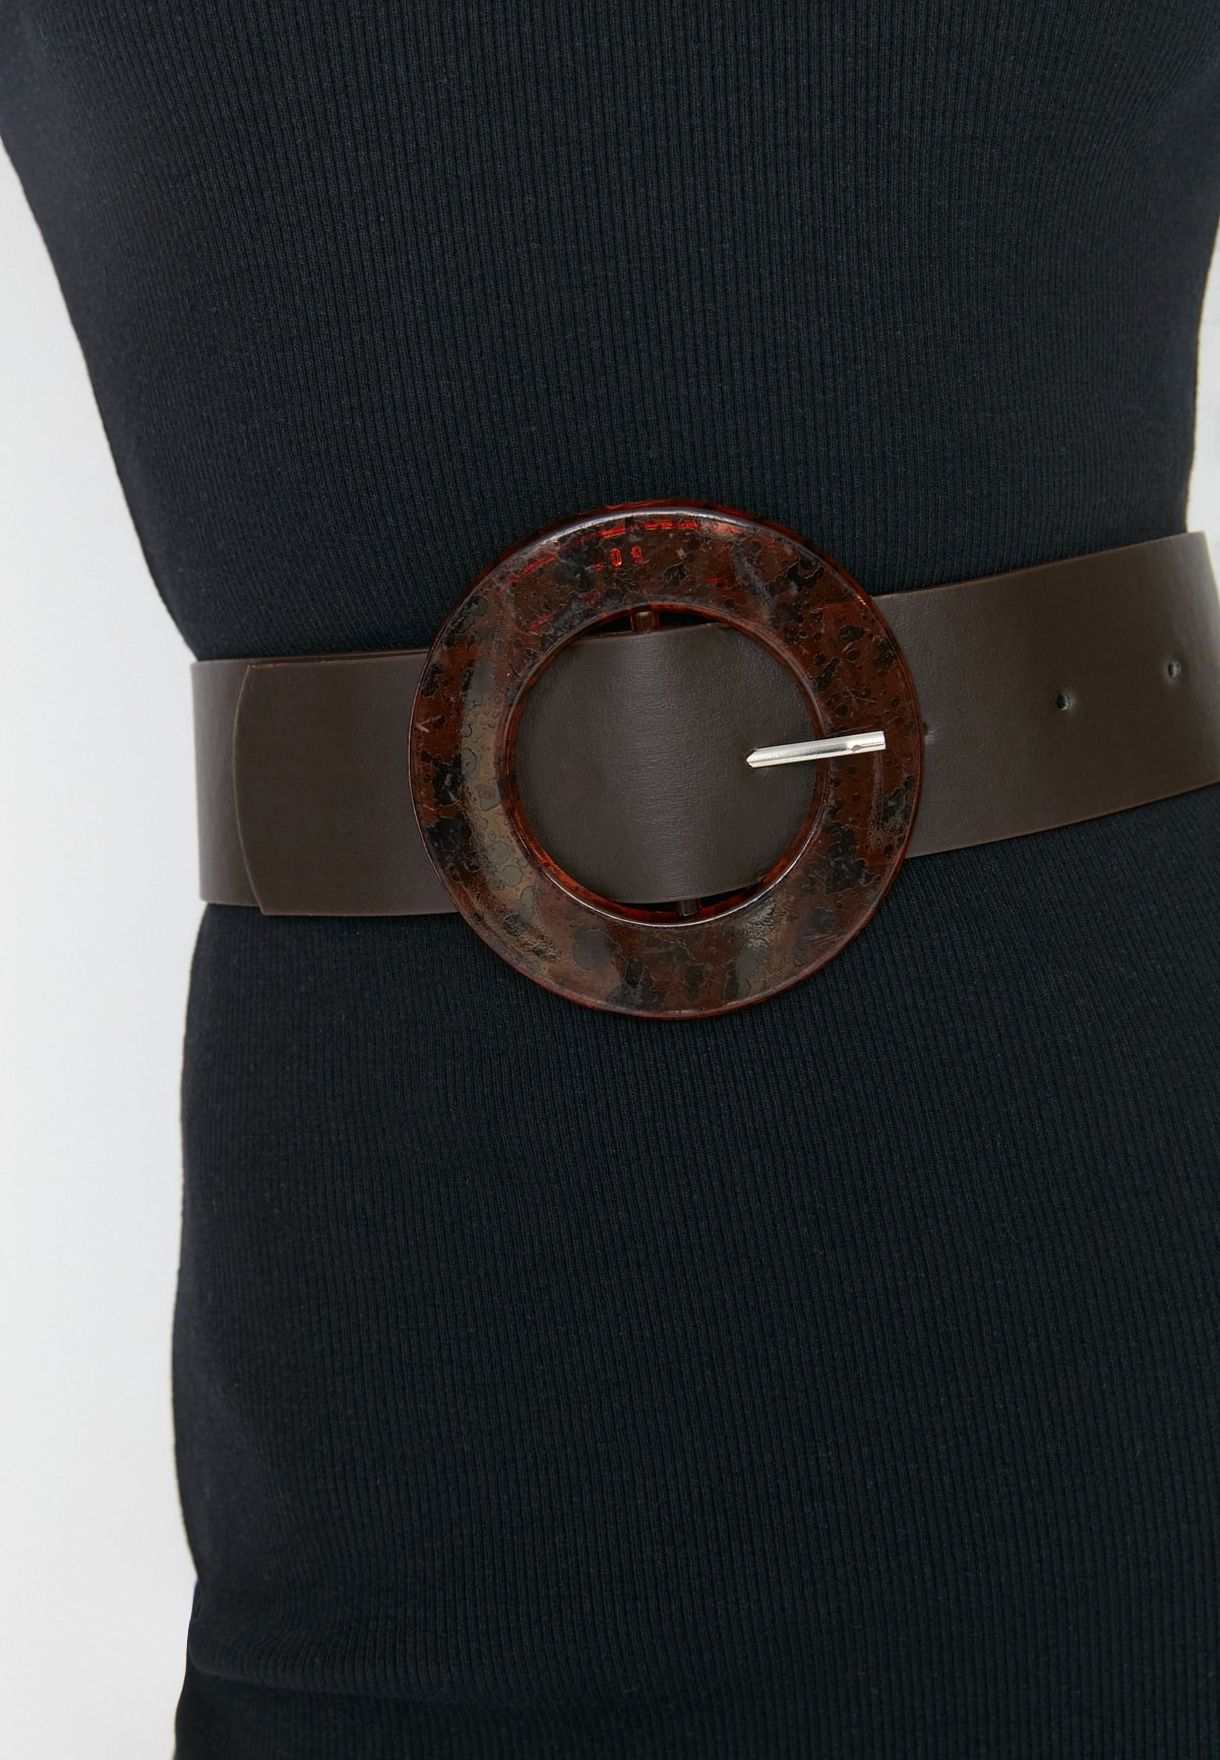 2 Pack Of Allocated Hole Belts